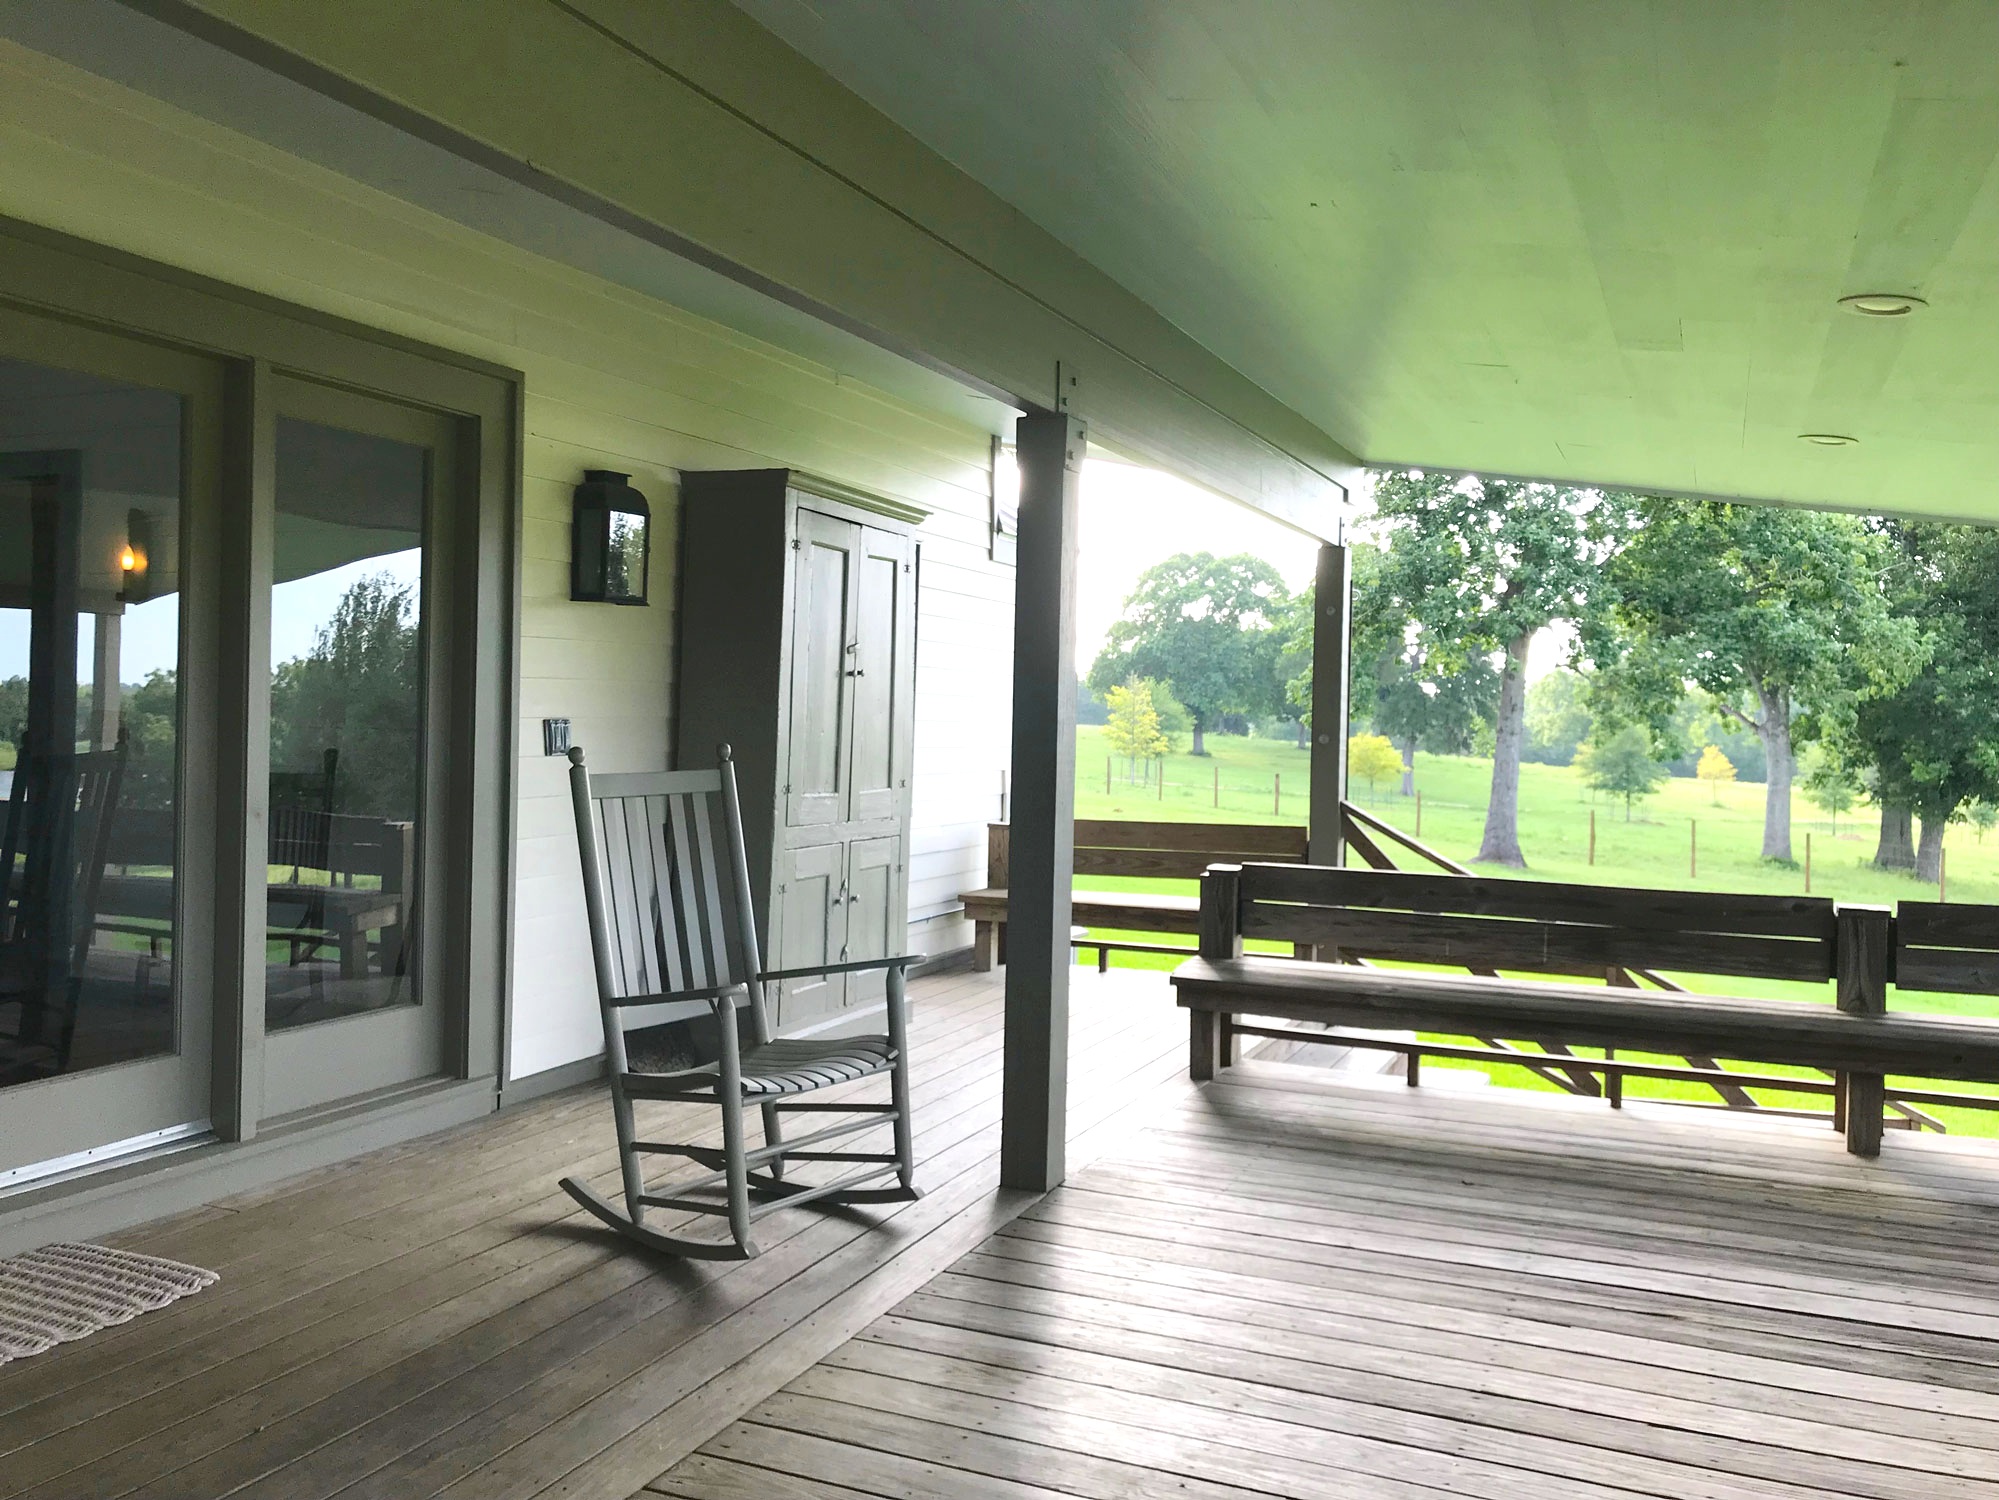 The Covered Porch at The Ranch House